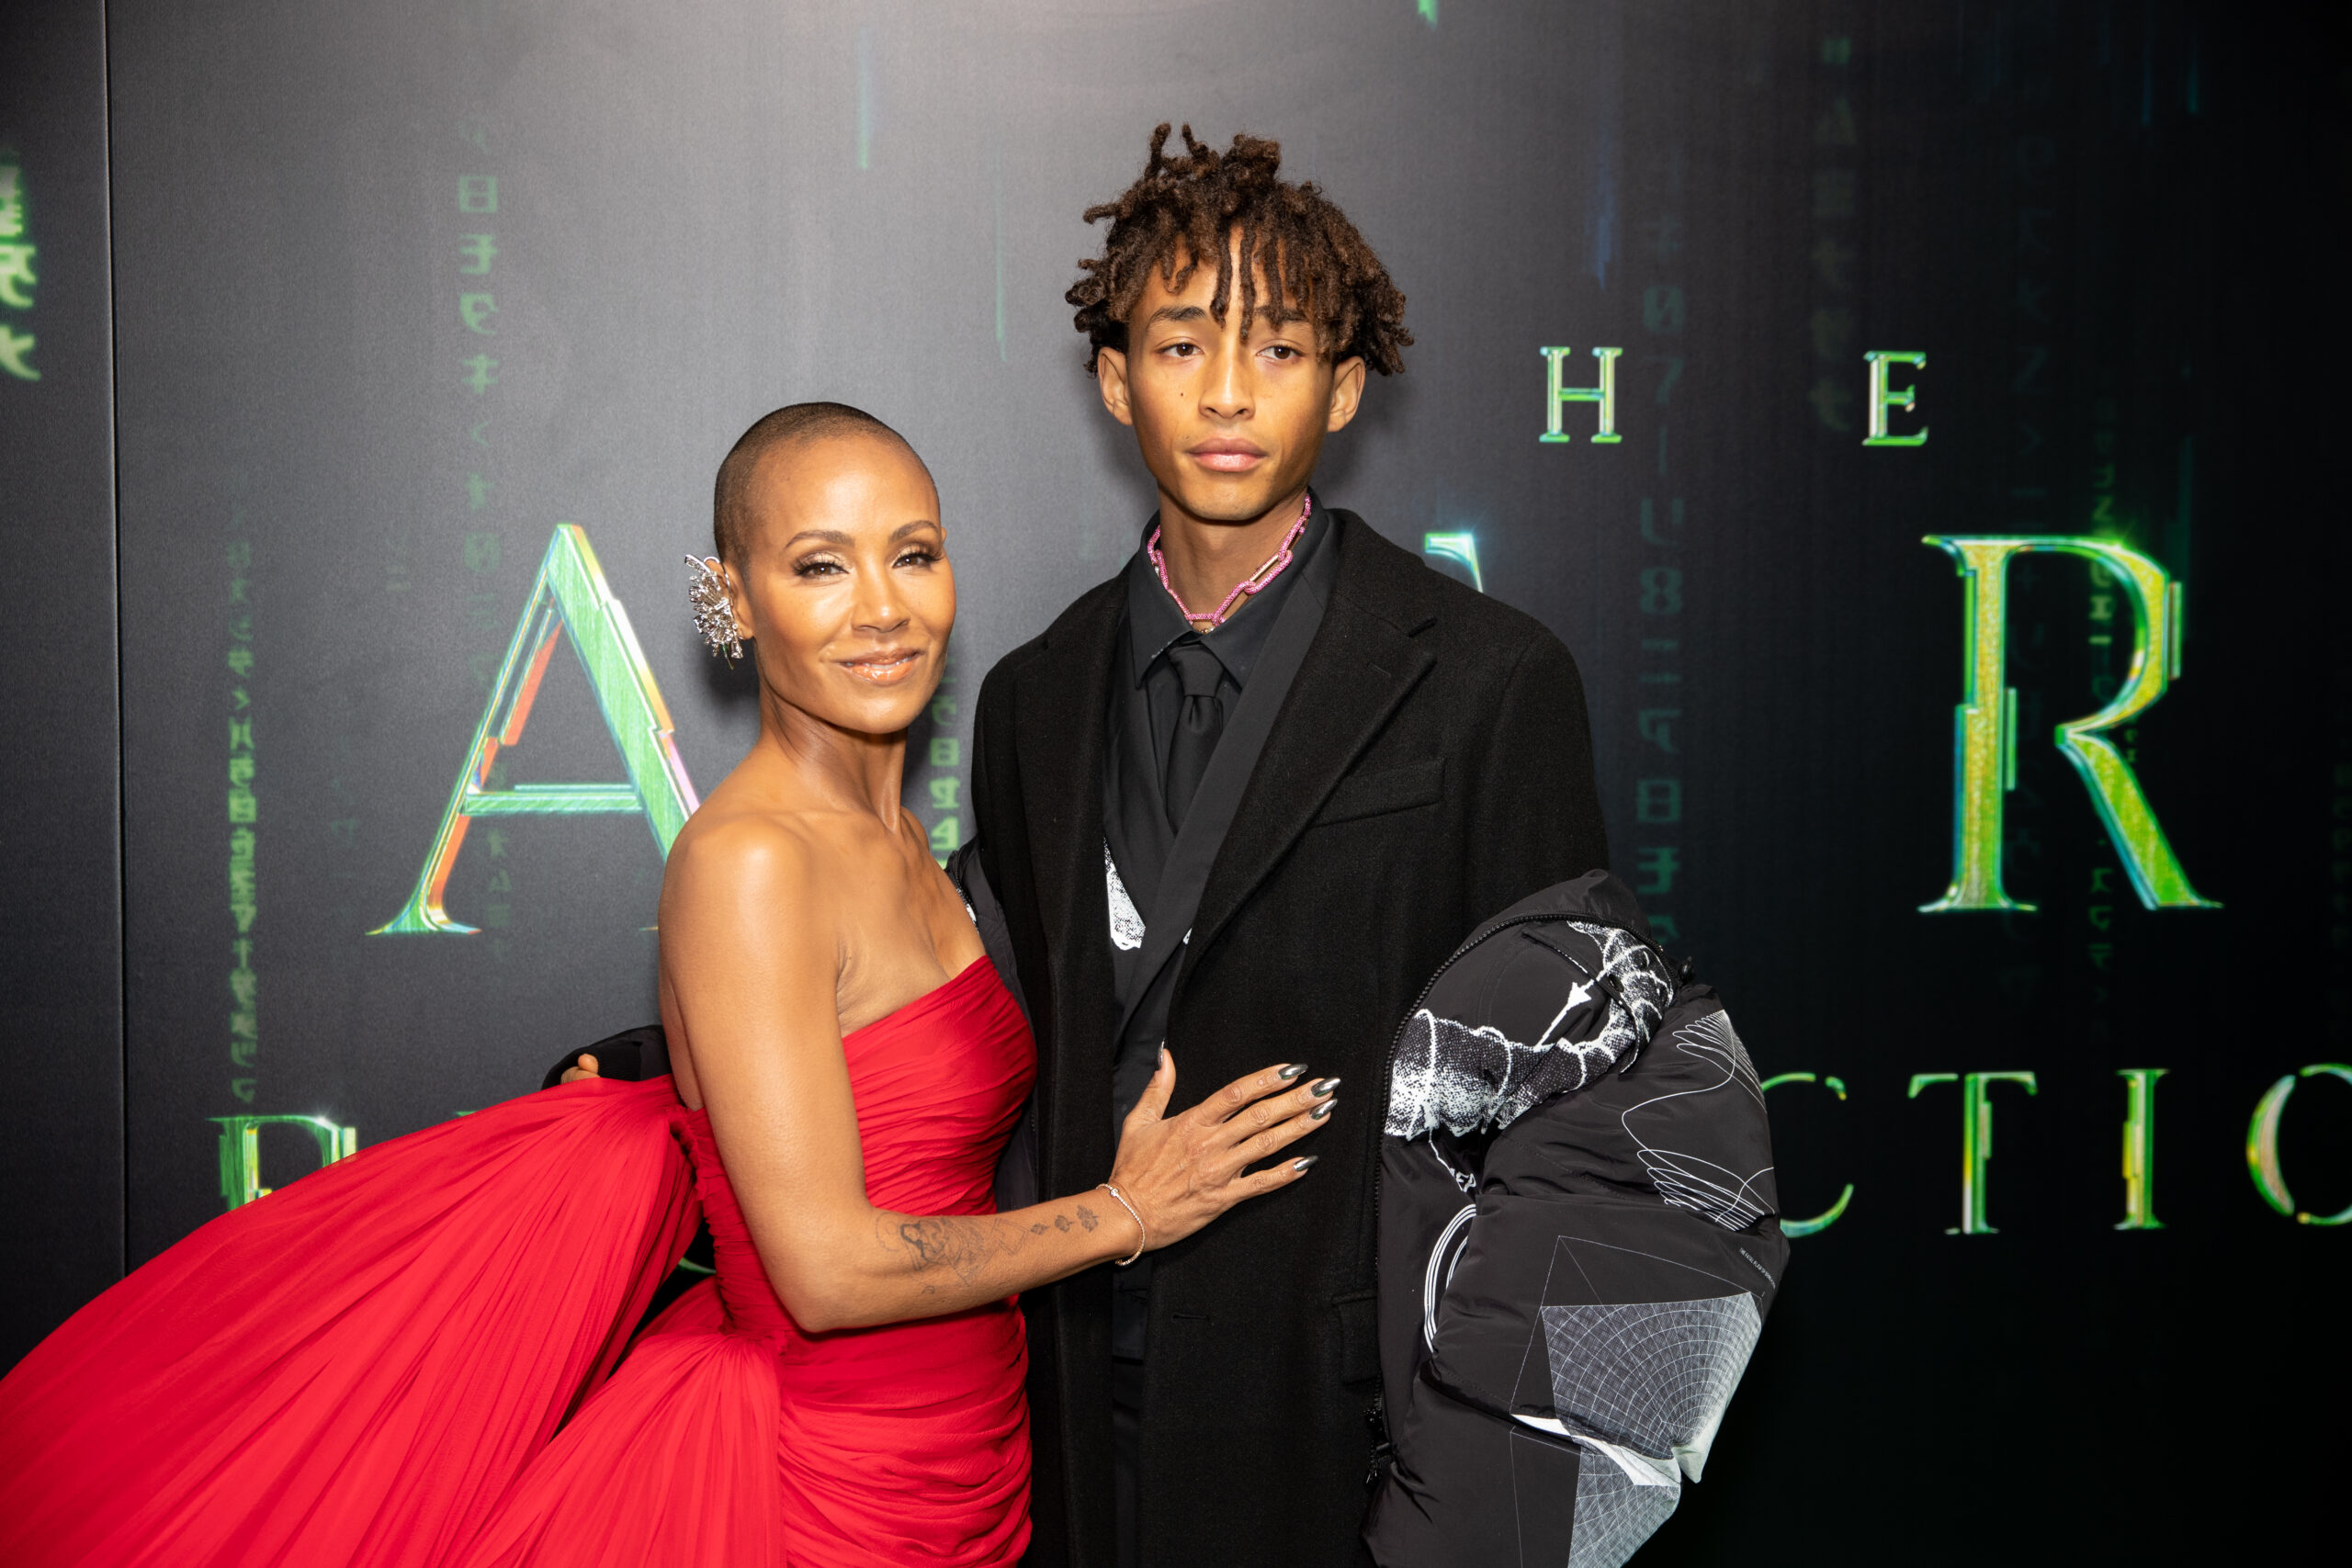 Jaden Smith Goes to the Prom Dressed as What?!